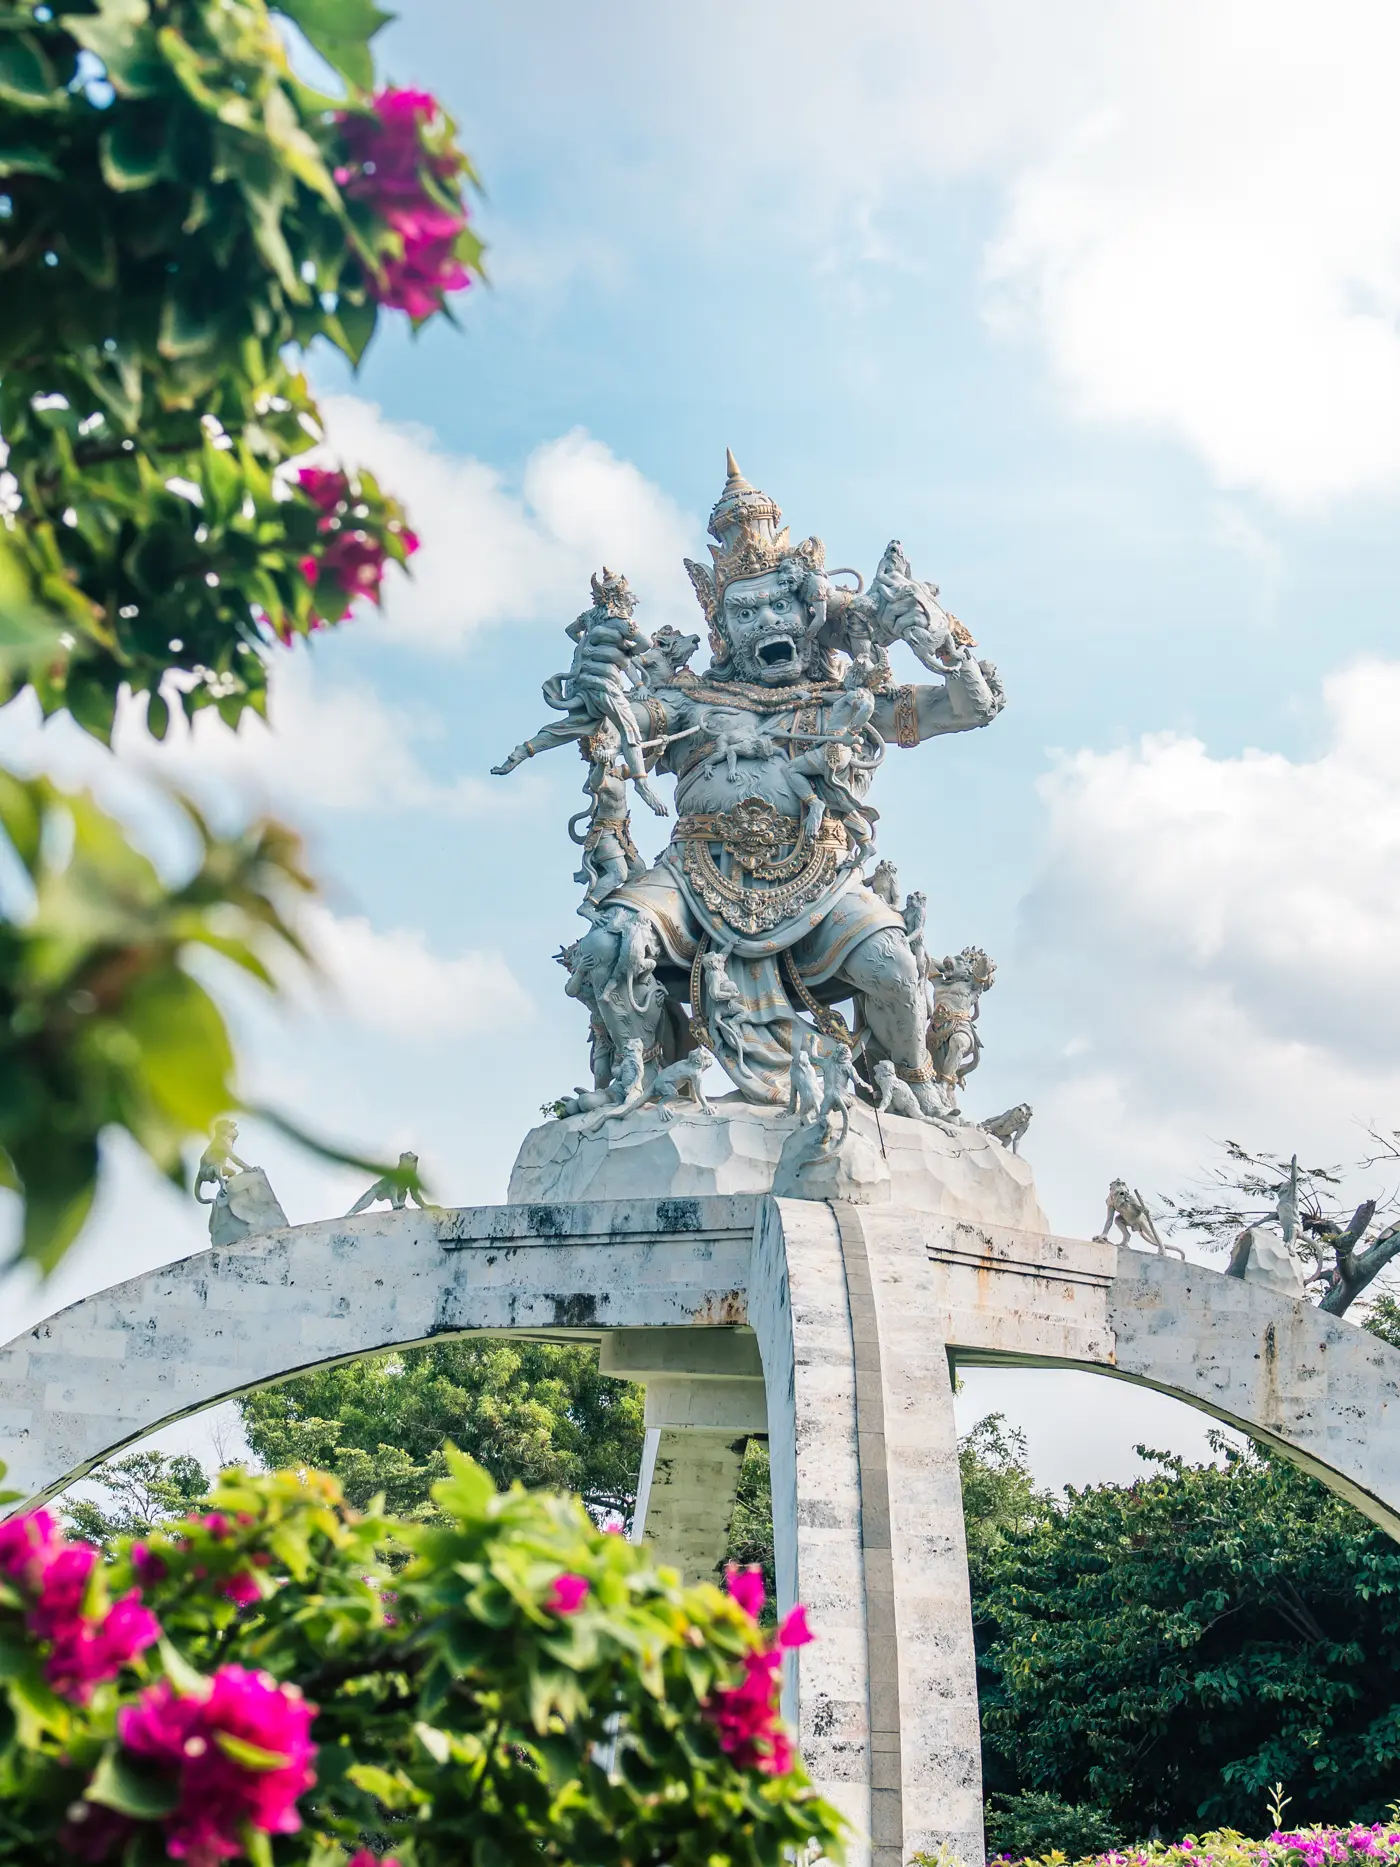 White stone Balinese god/warrior statue surrounded by greenery and purple Bougainvillea at Uluwatu Temple in Bali.